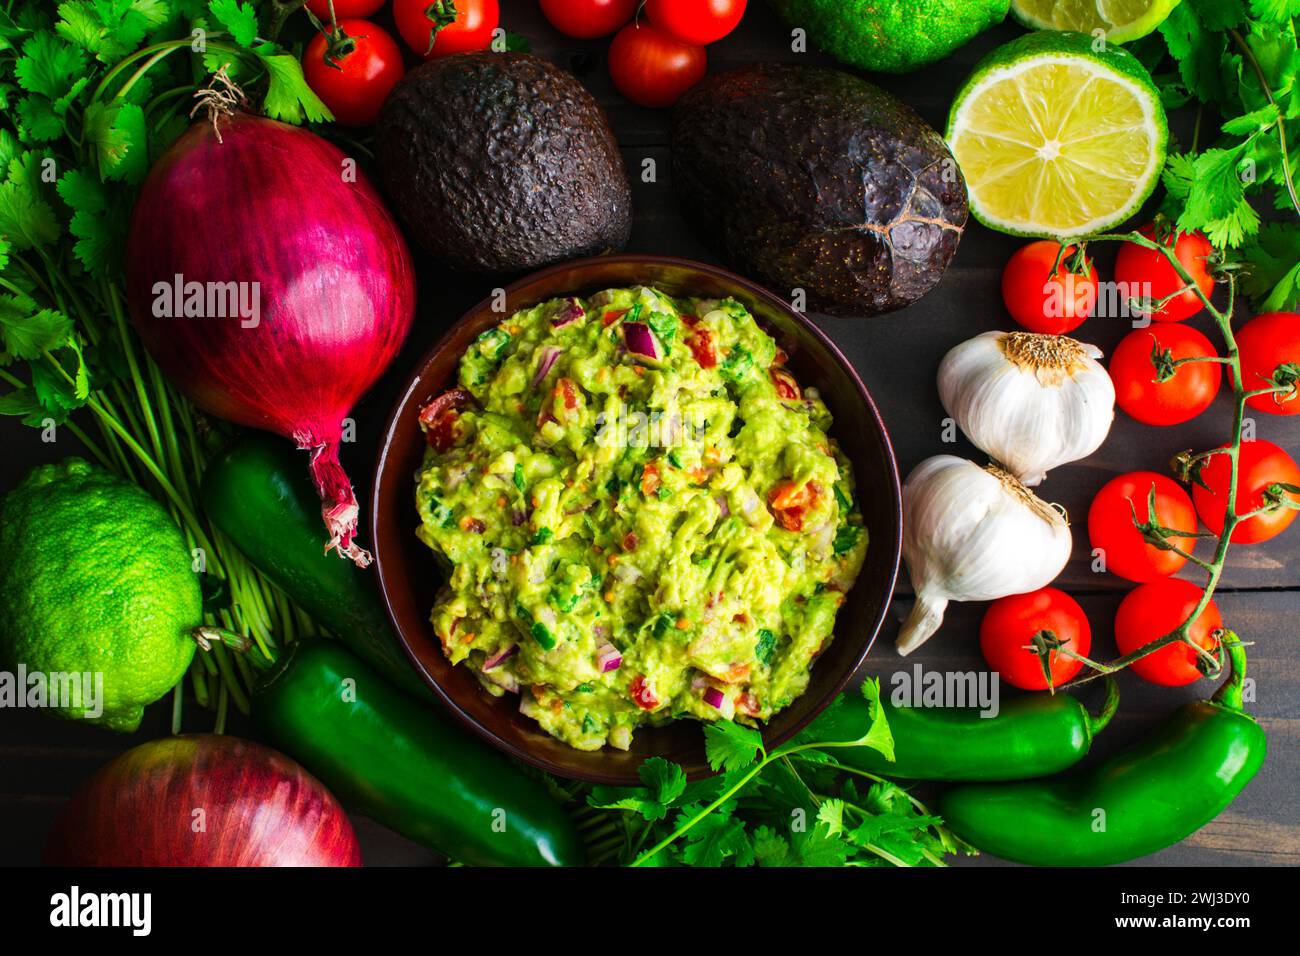 Bowl of Guacamole Surrounded by Fresh Ingredients: Guacamole with Hass avocados, jalapeno peppers, cherry tomatoes, and other ingredients Stock Photo